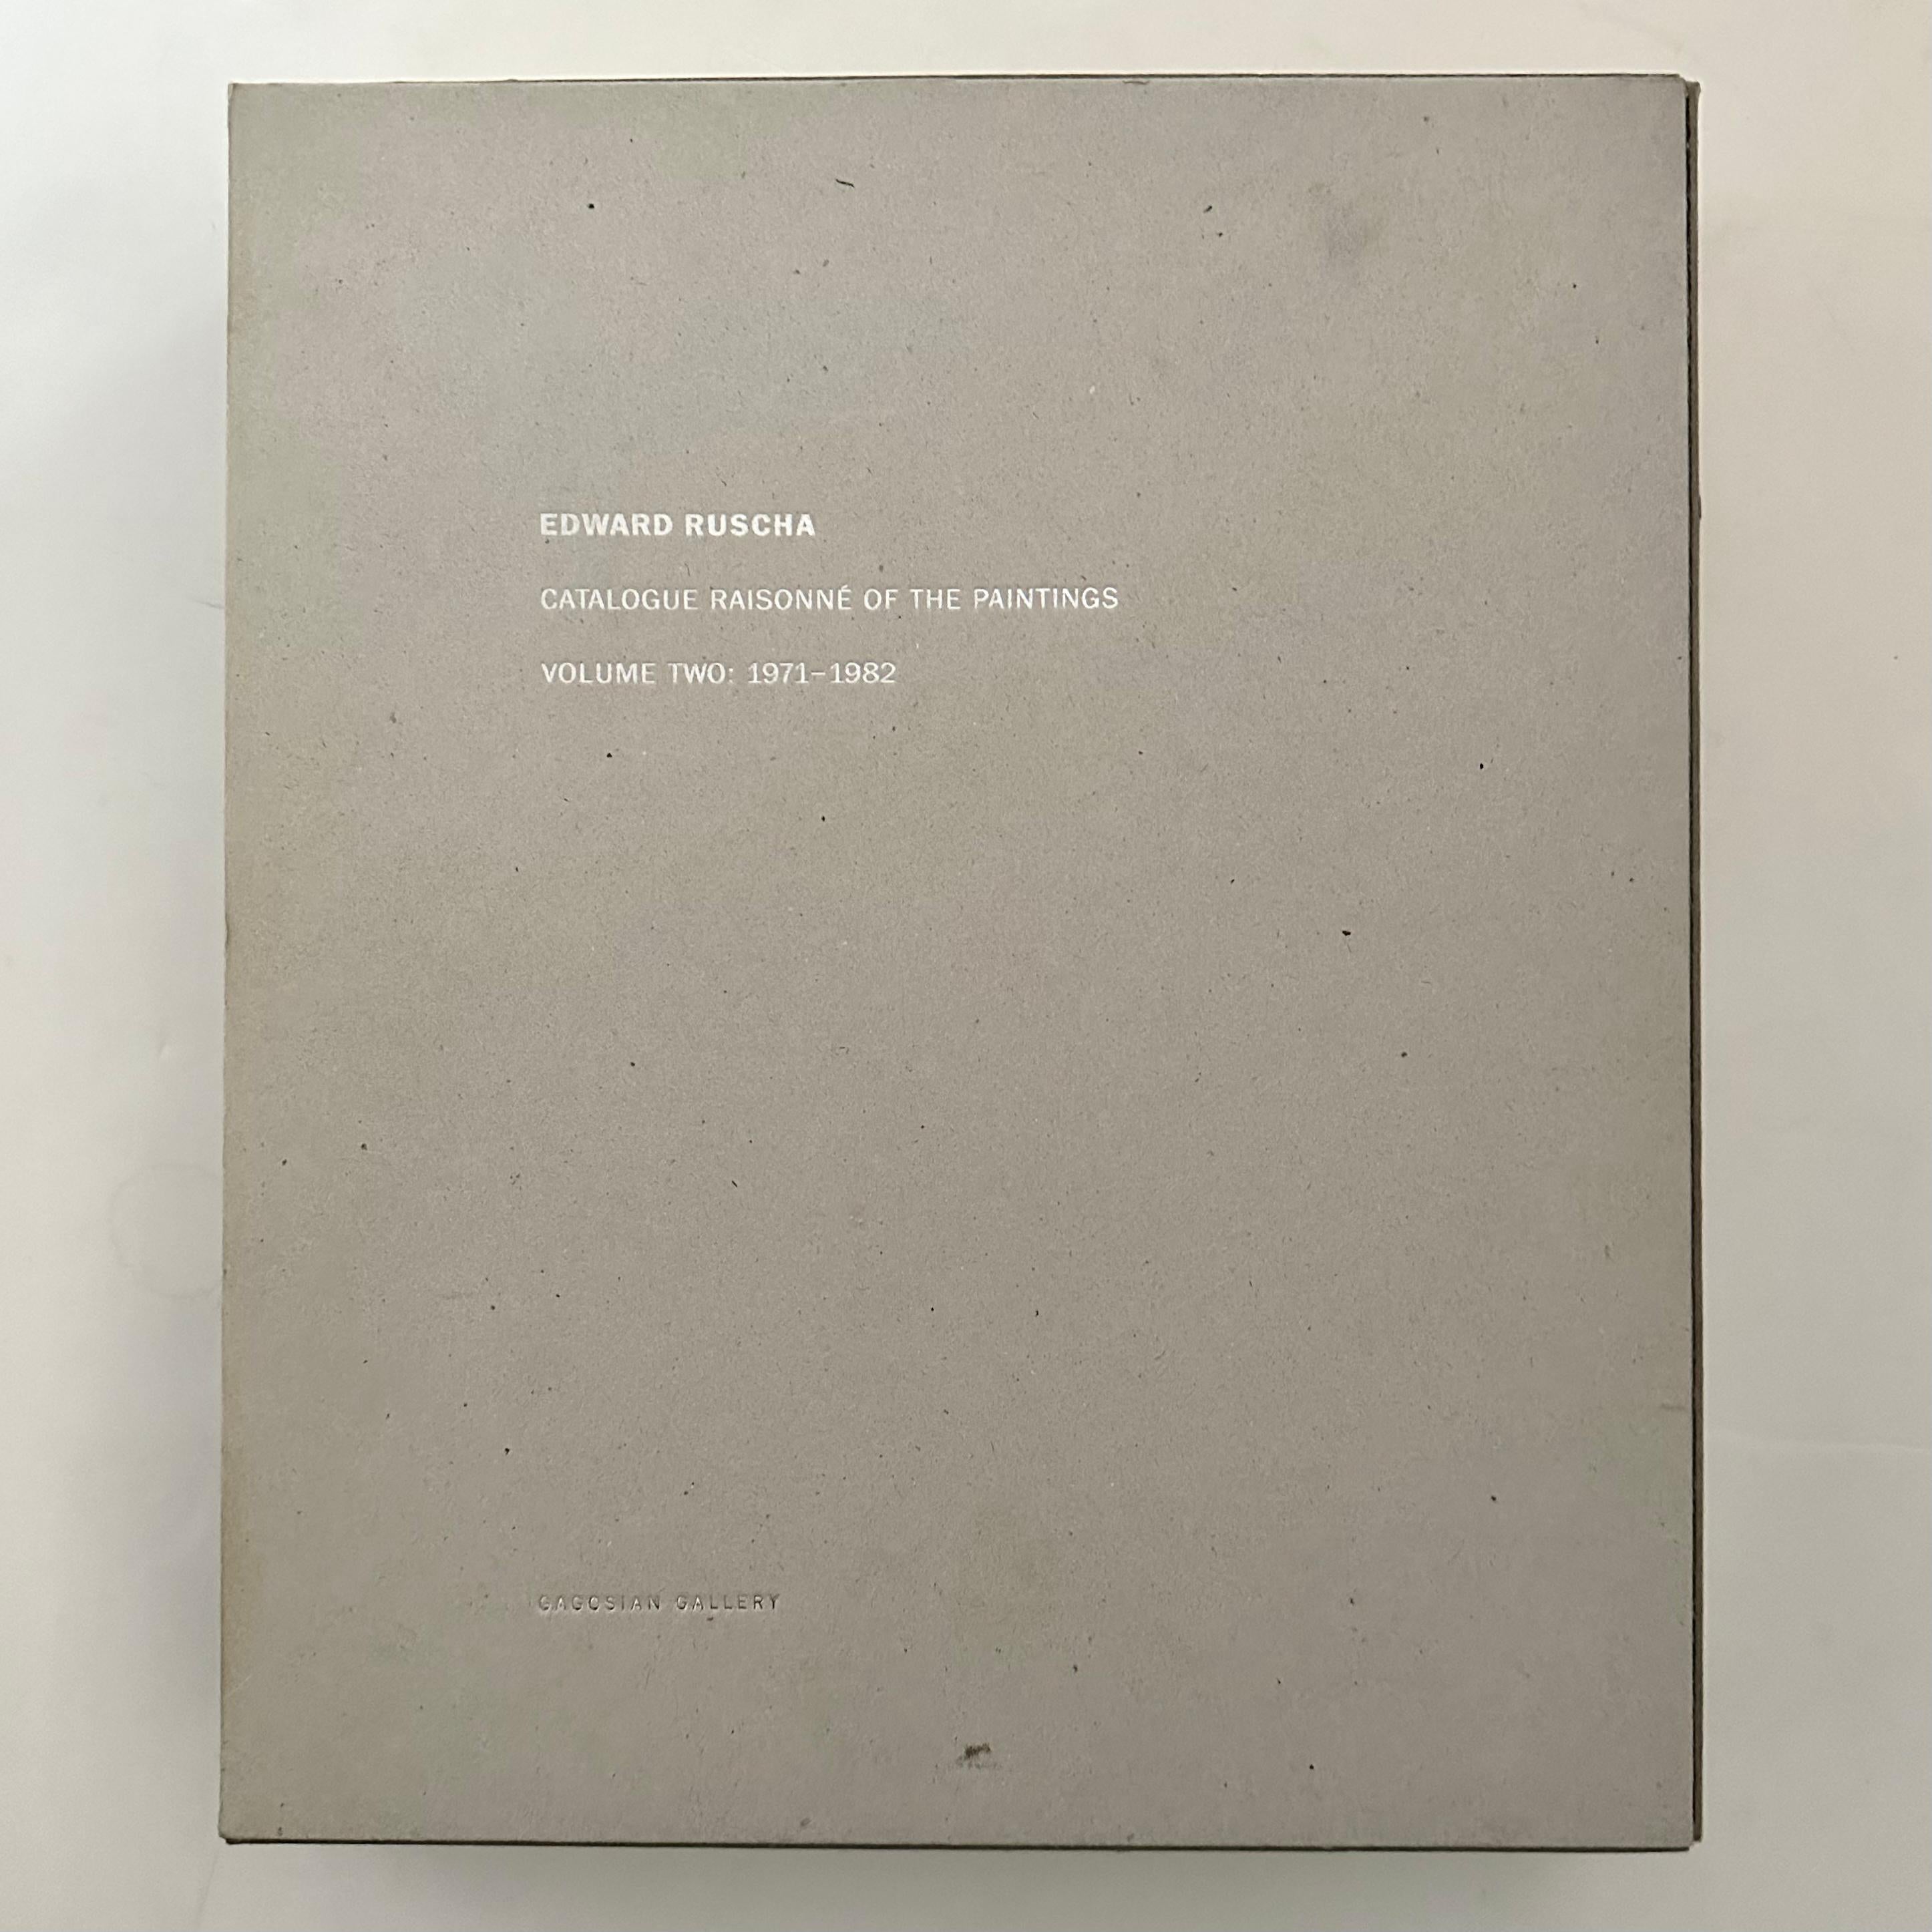 Published by Gagosian Gallery, 2005 Hardback in printed slipcase. 

Volume 2 contains entries on 178 paintings completed between 1971 and 1982 - from the artist's crisis at the onset of the 70s, when he 